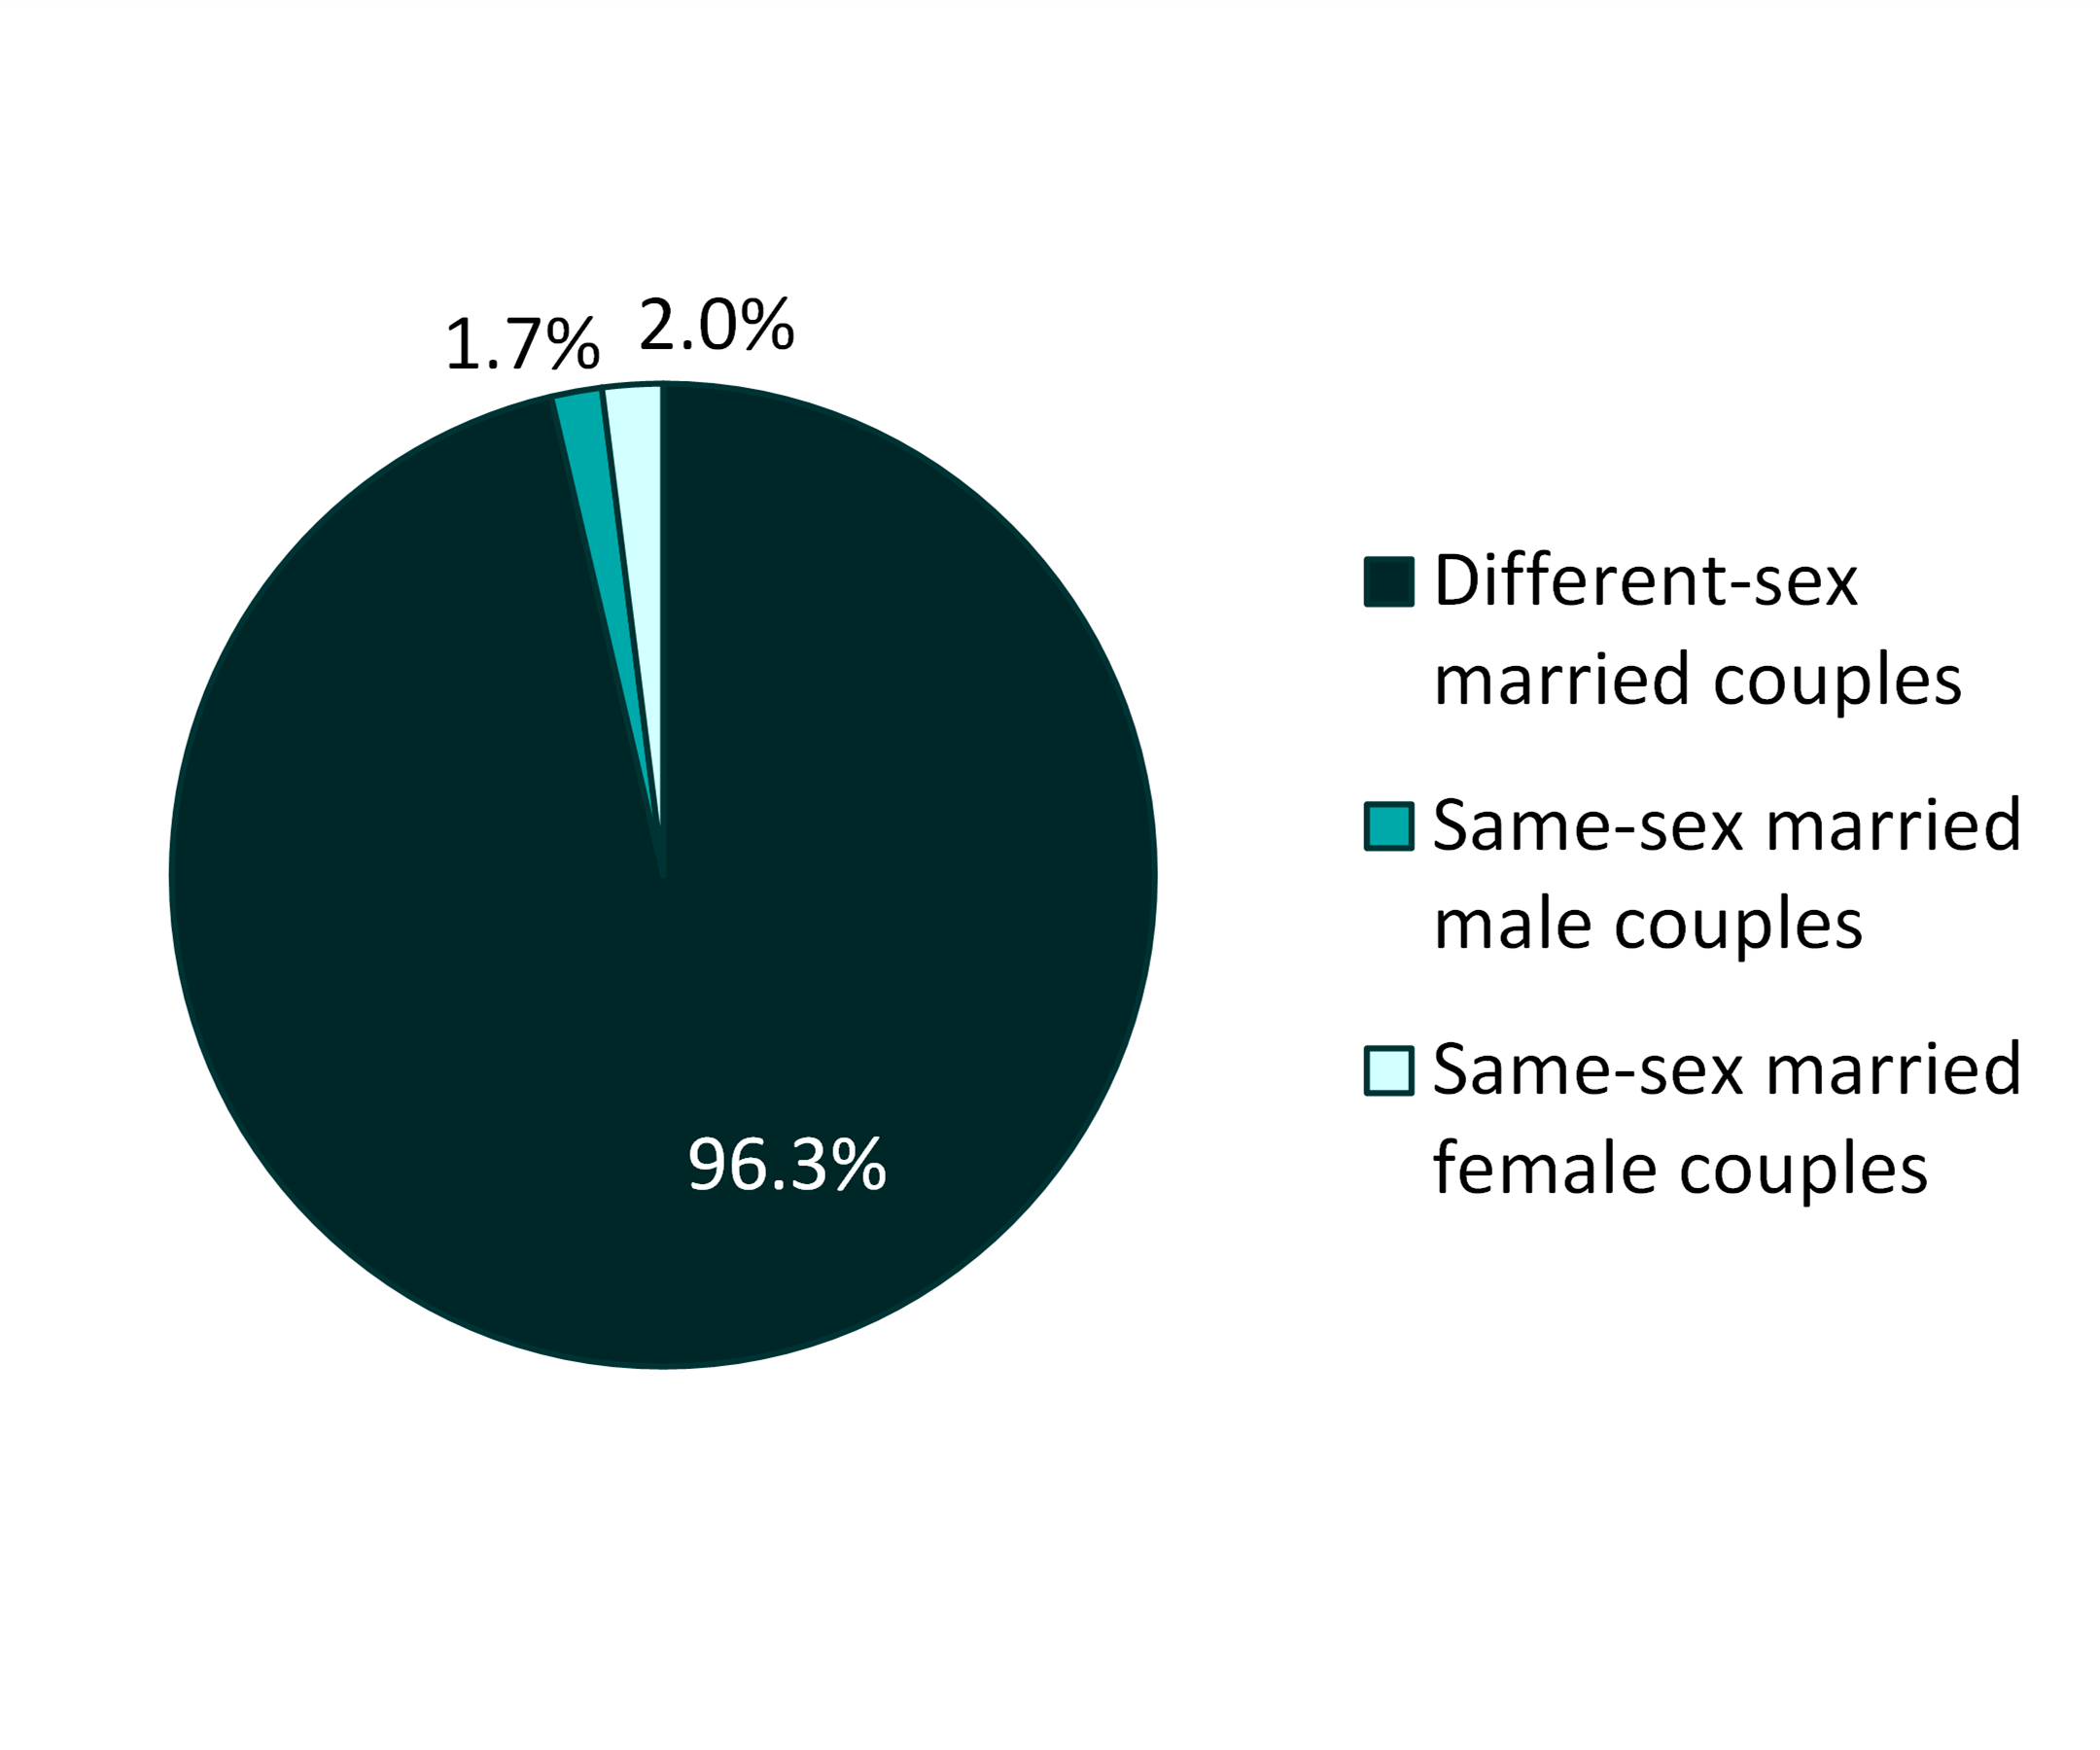 pie chart showing Figure 1. Gender Composition of Recently Married Couples, 2019